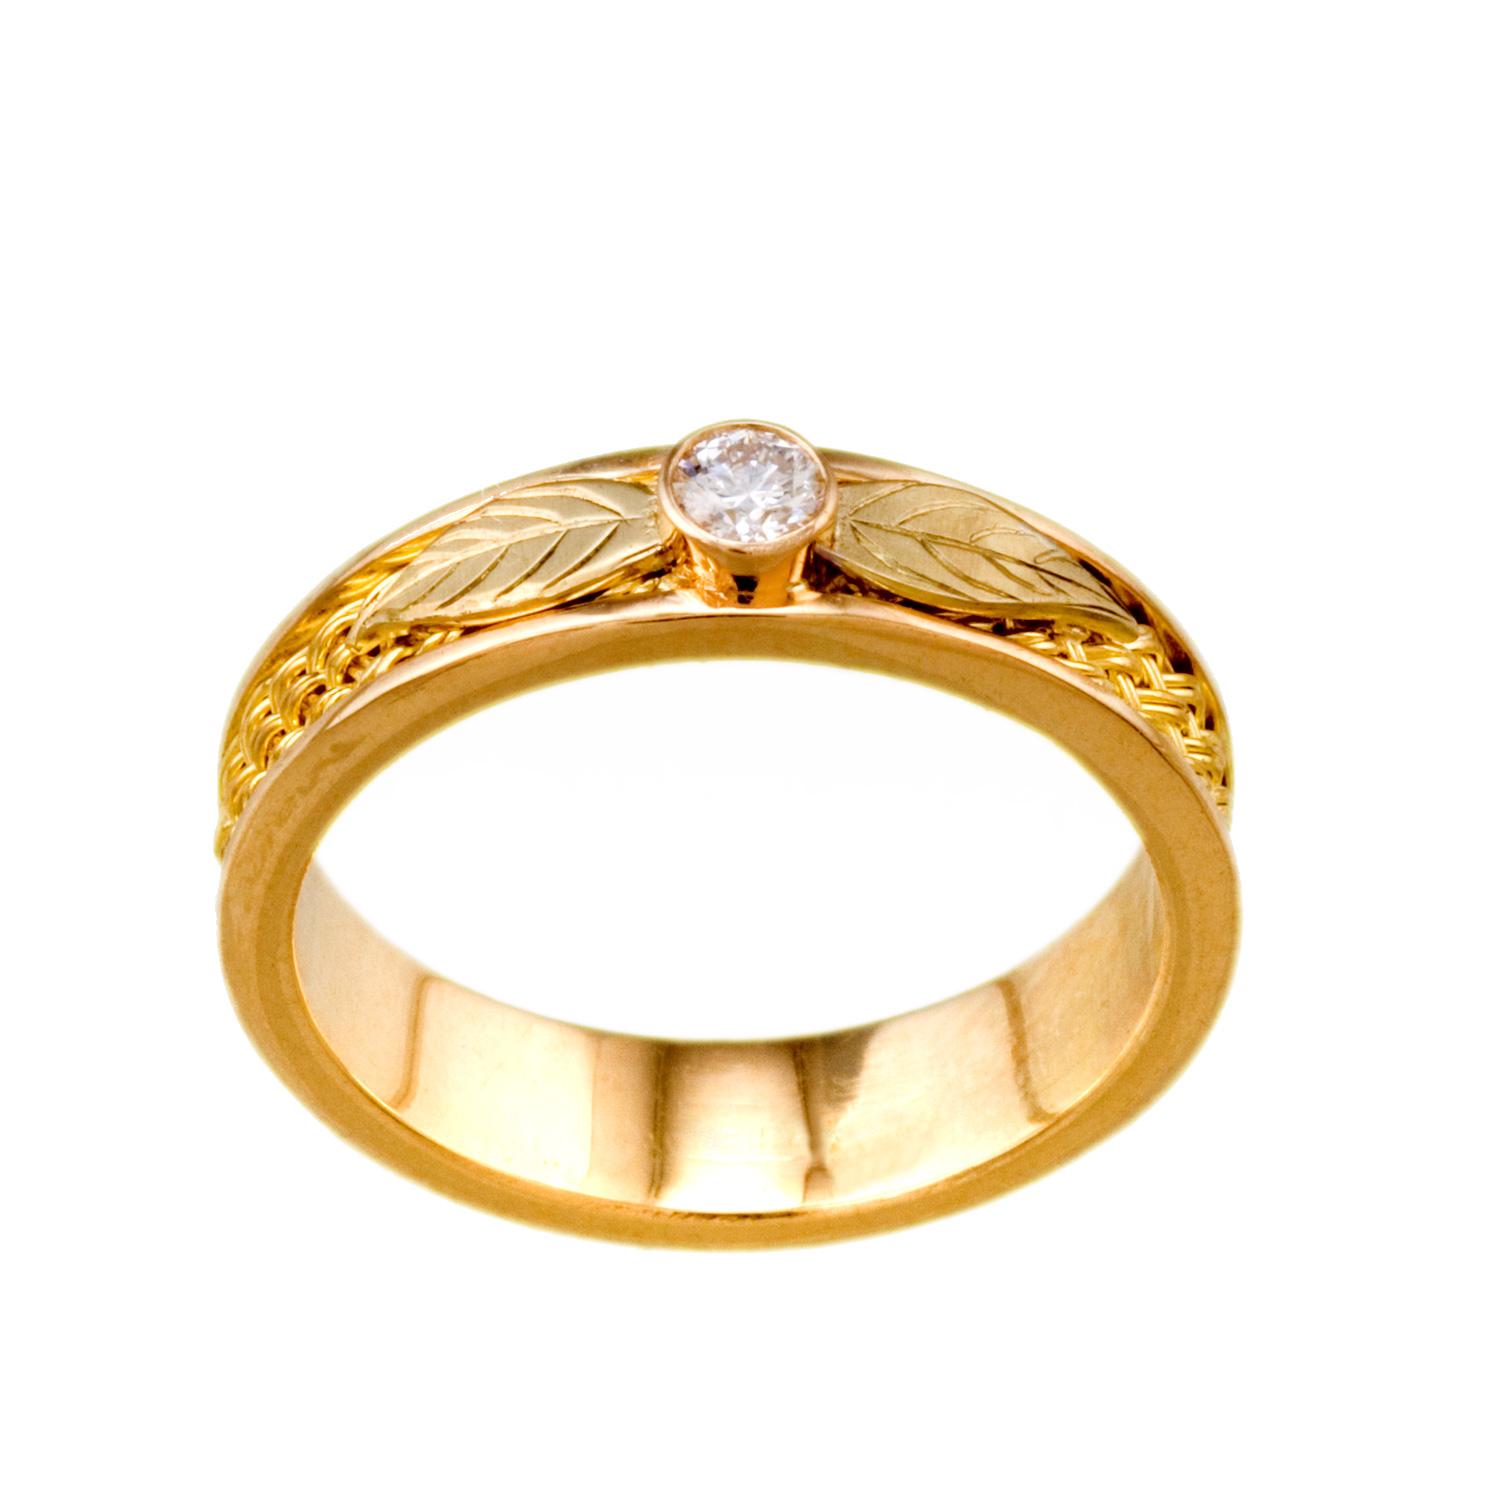  Ash Leaves Ring by Tamberlaine